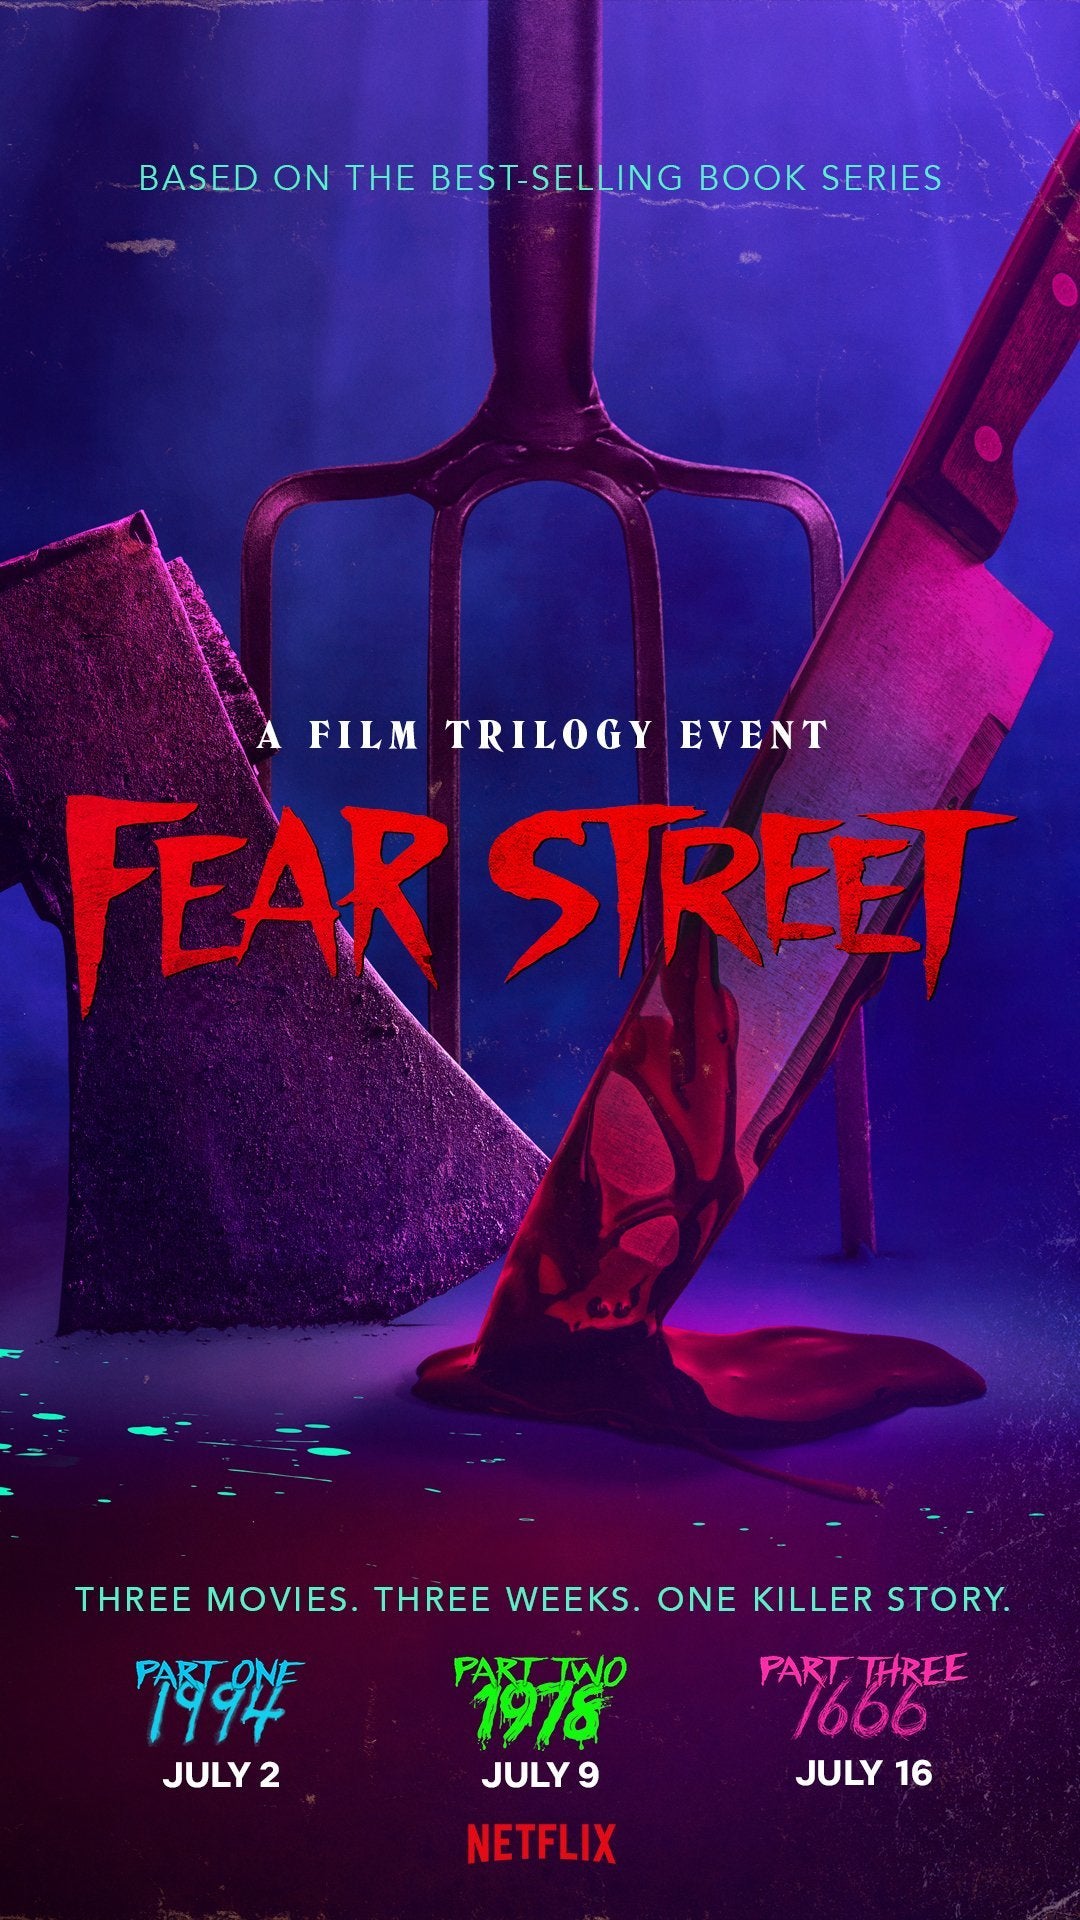 Horror Trilogy 'Fear Street' Coming To Netflix This Summer